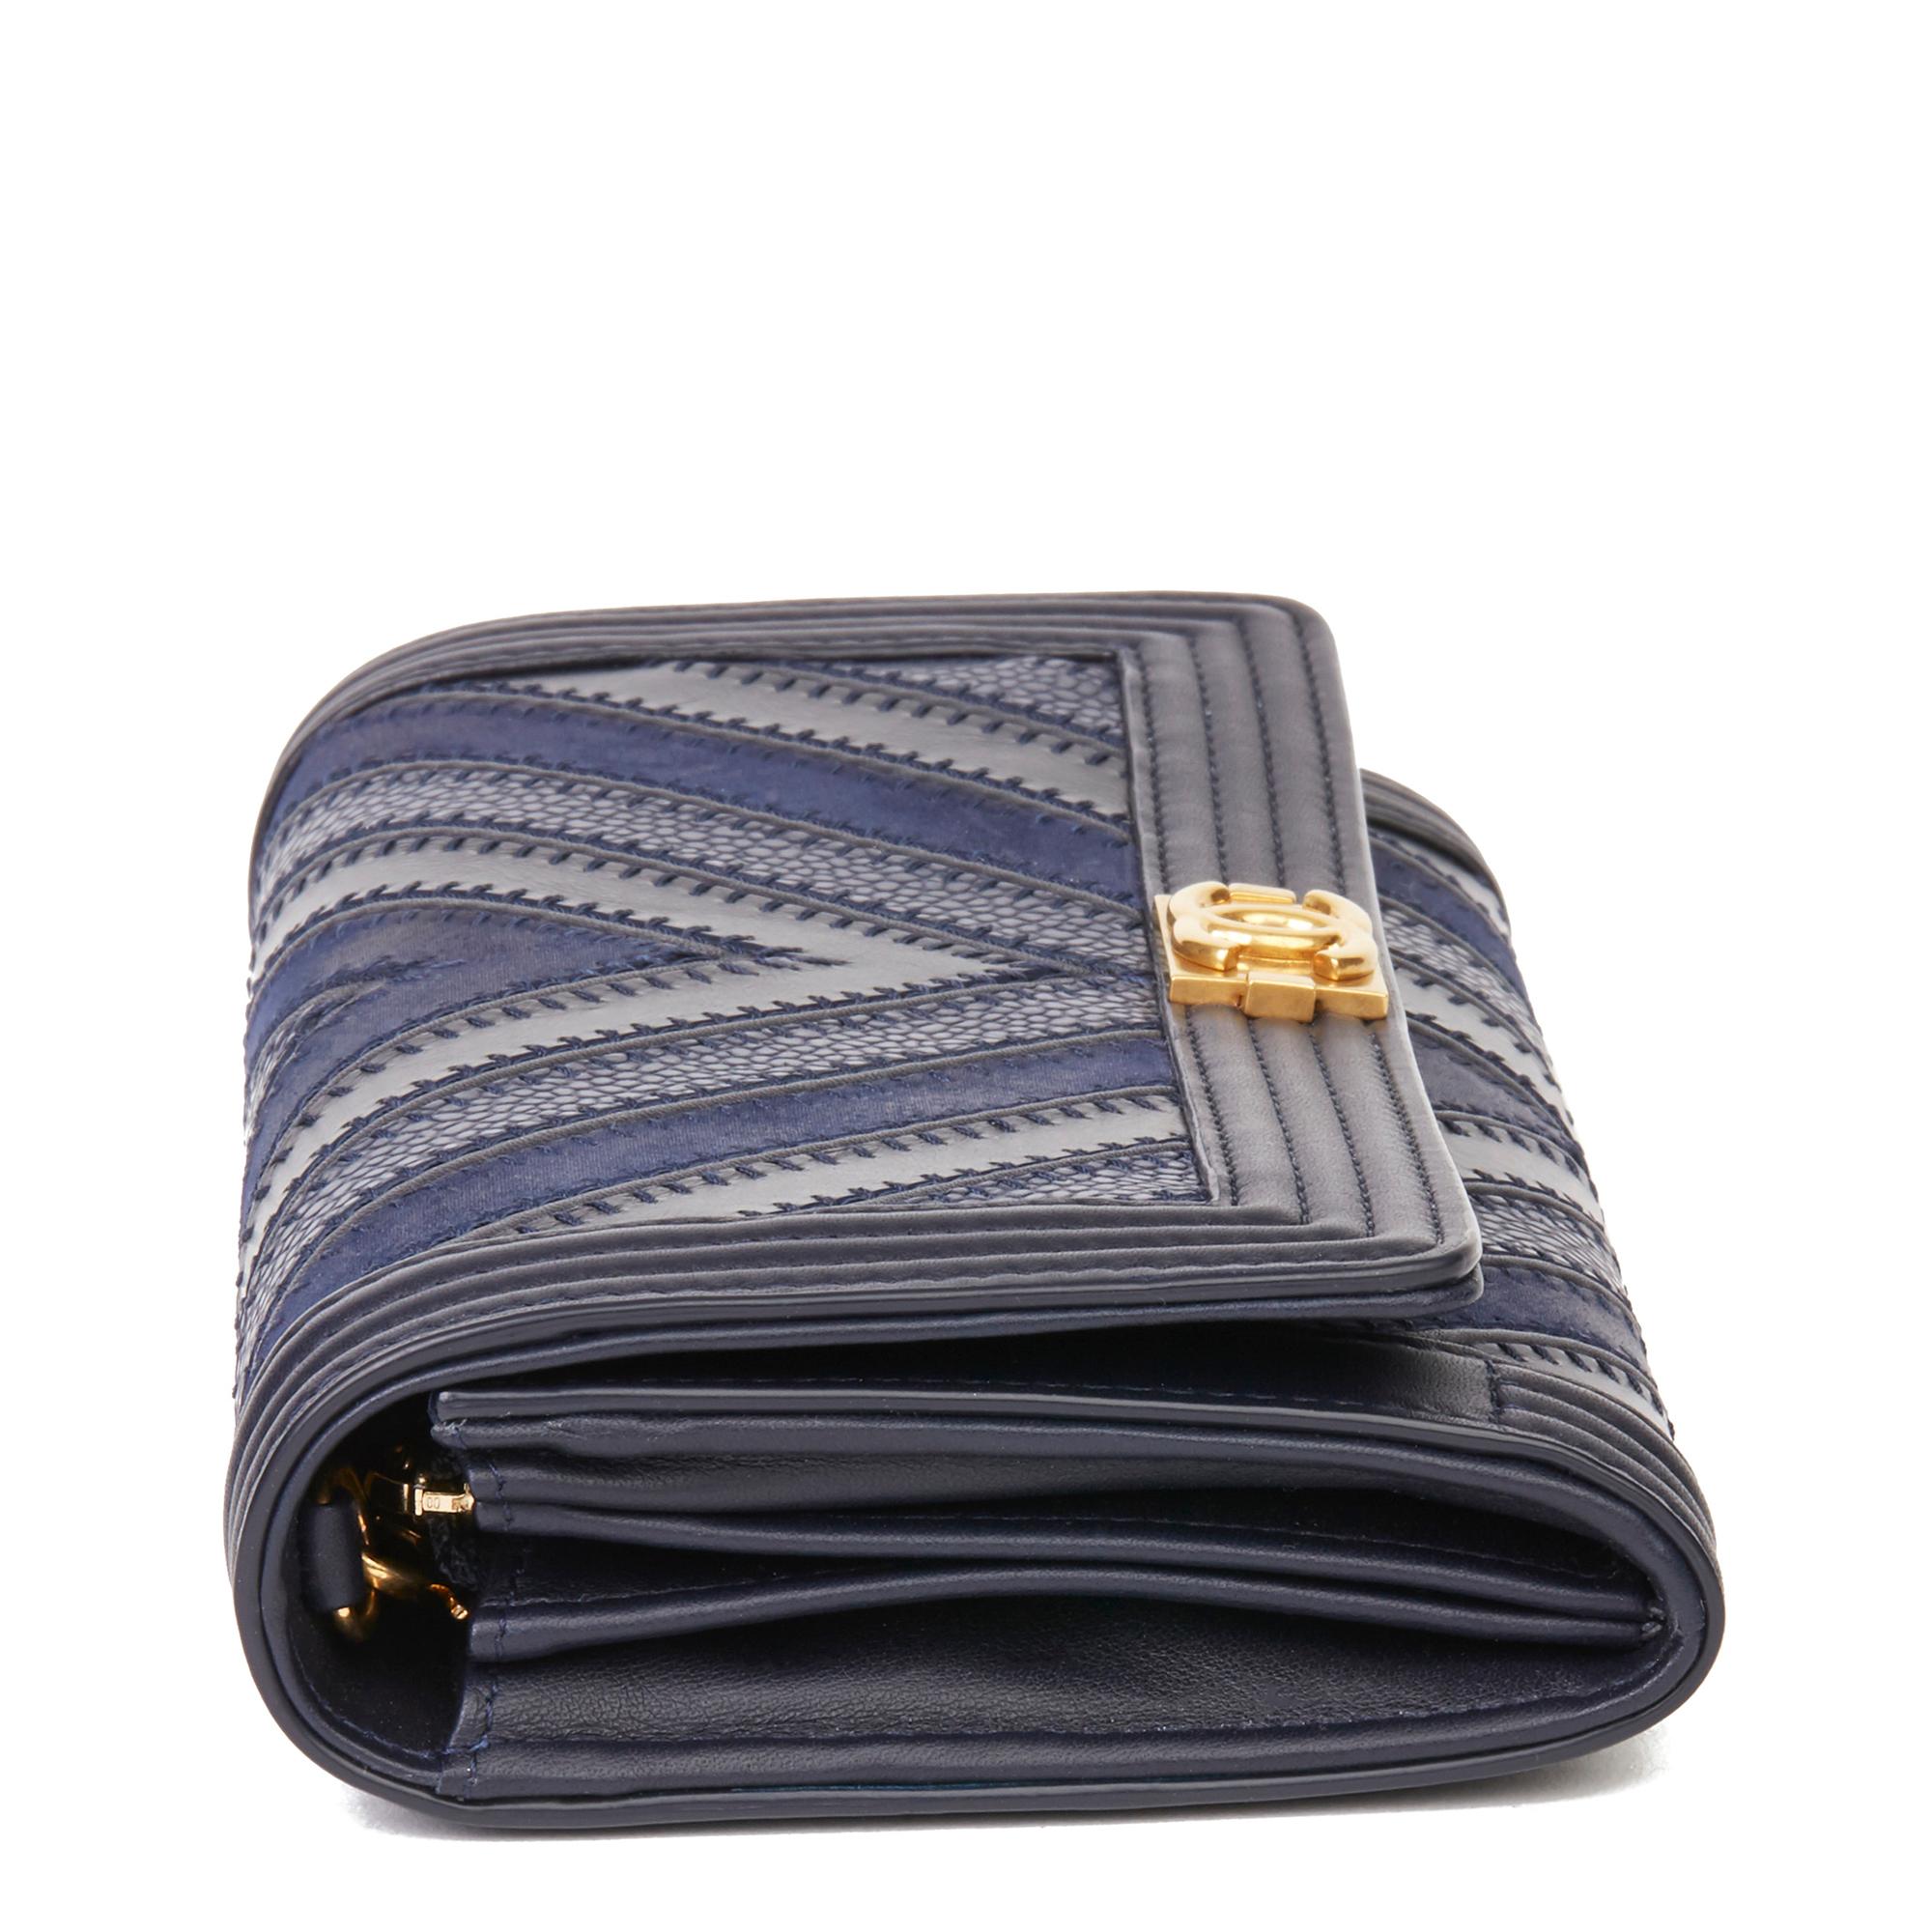 CHANEL
Navy, Black Chevron Quilted, Calfskin, Lambskin & Caviar Leather Le Boy Wallet-on-Chain WOC

Xupes Reference: HB3375
Serial Number: 22560565
Age (Circa): 2016
Accompanied By: Chanel Dust Bag, Box, Authenticity Card, Care Booklet, Protective